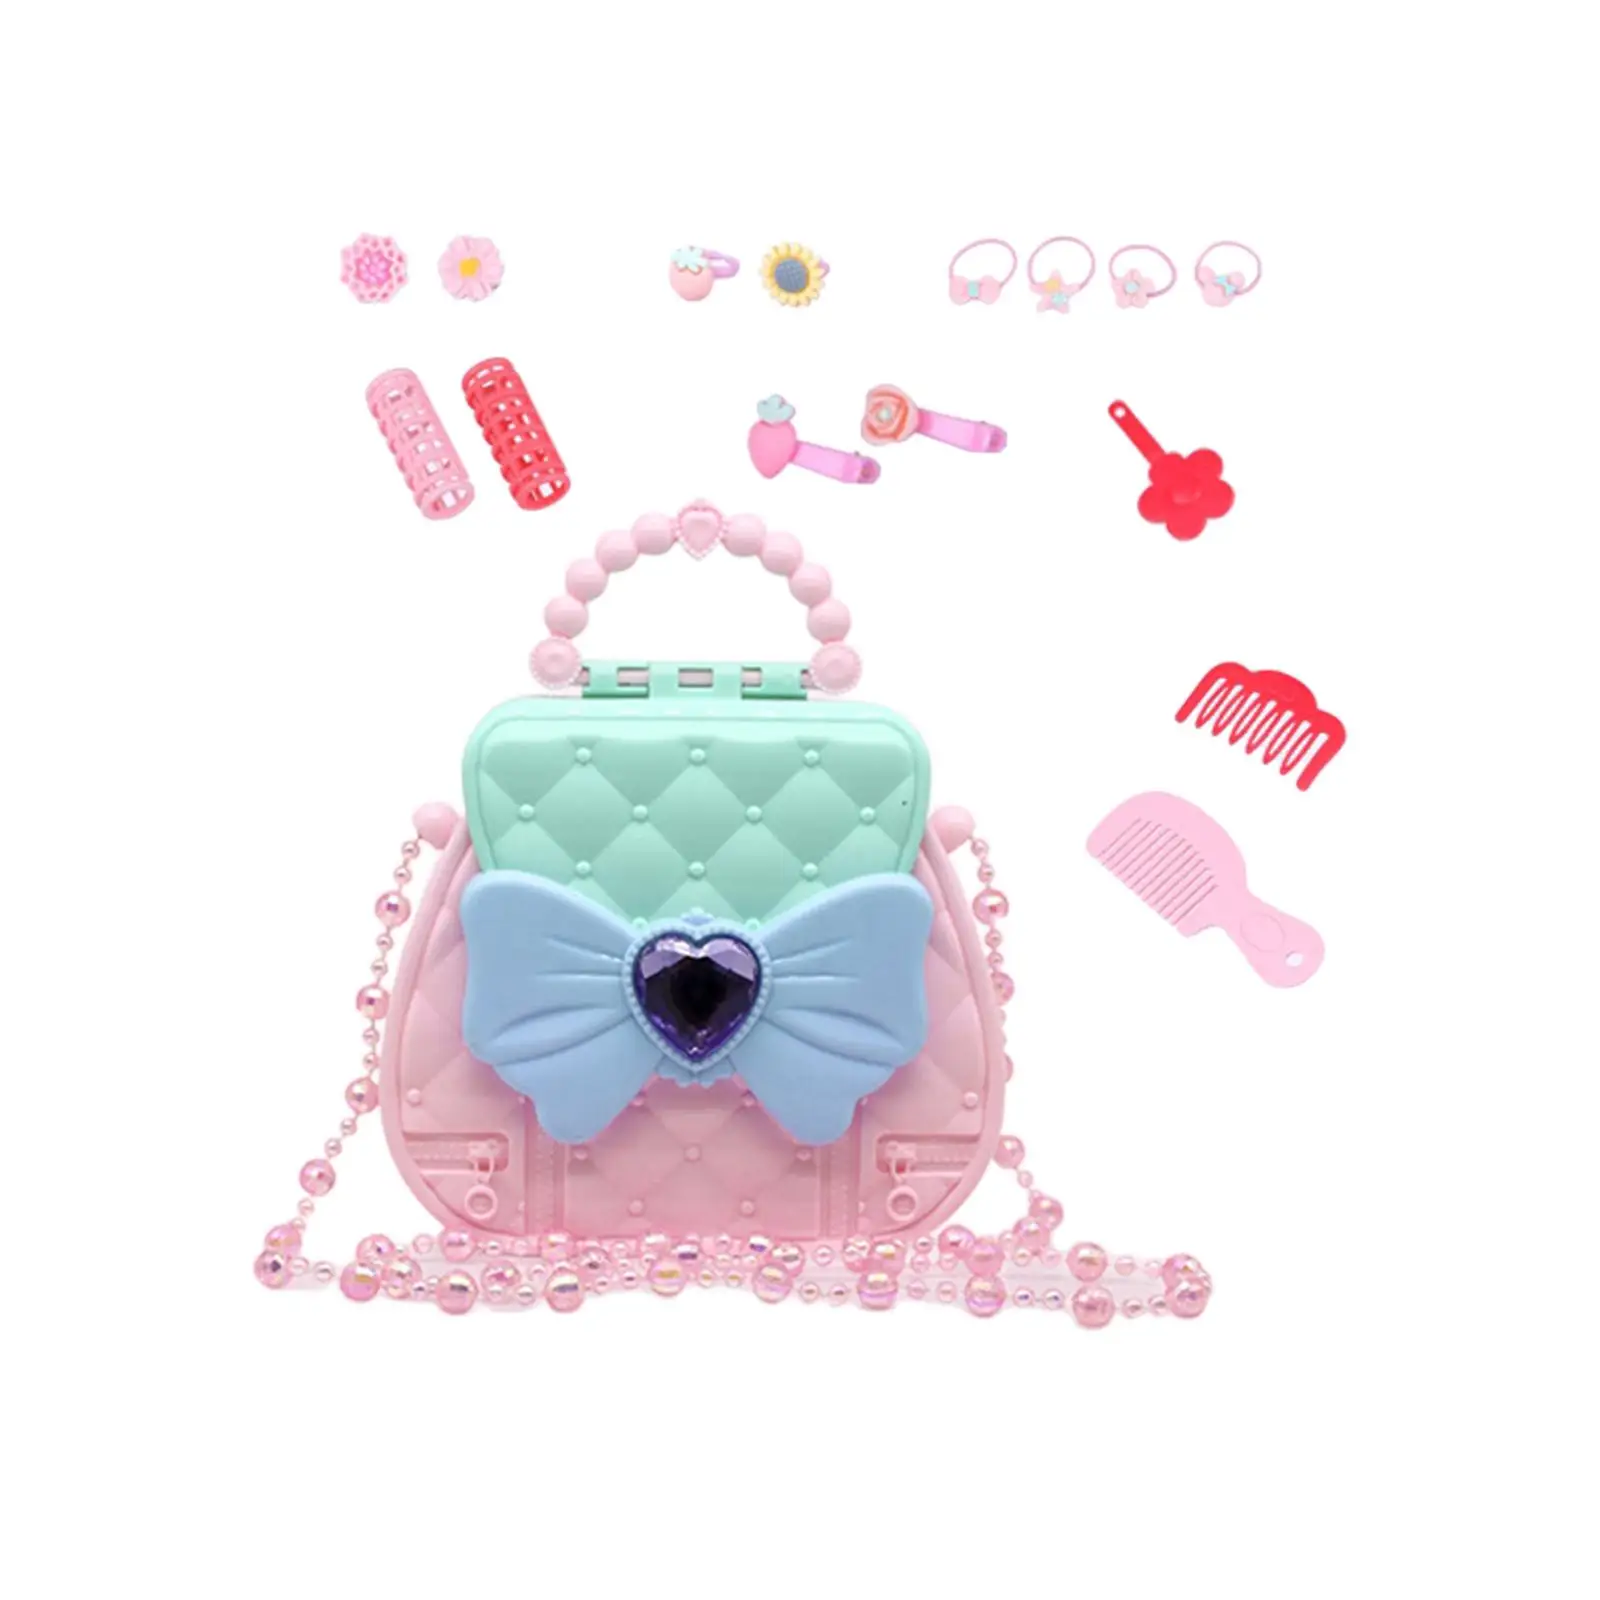 Pretend Play Handbag Toy Set Age 5+ Portable Decoration Toddlers Purse Playset for Birthday Festivals Holiday New Year Christmas